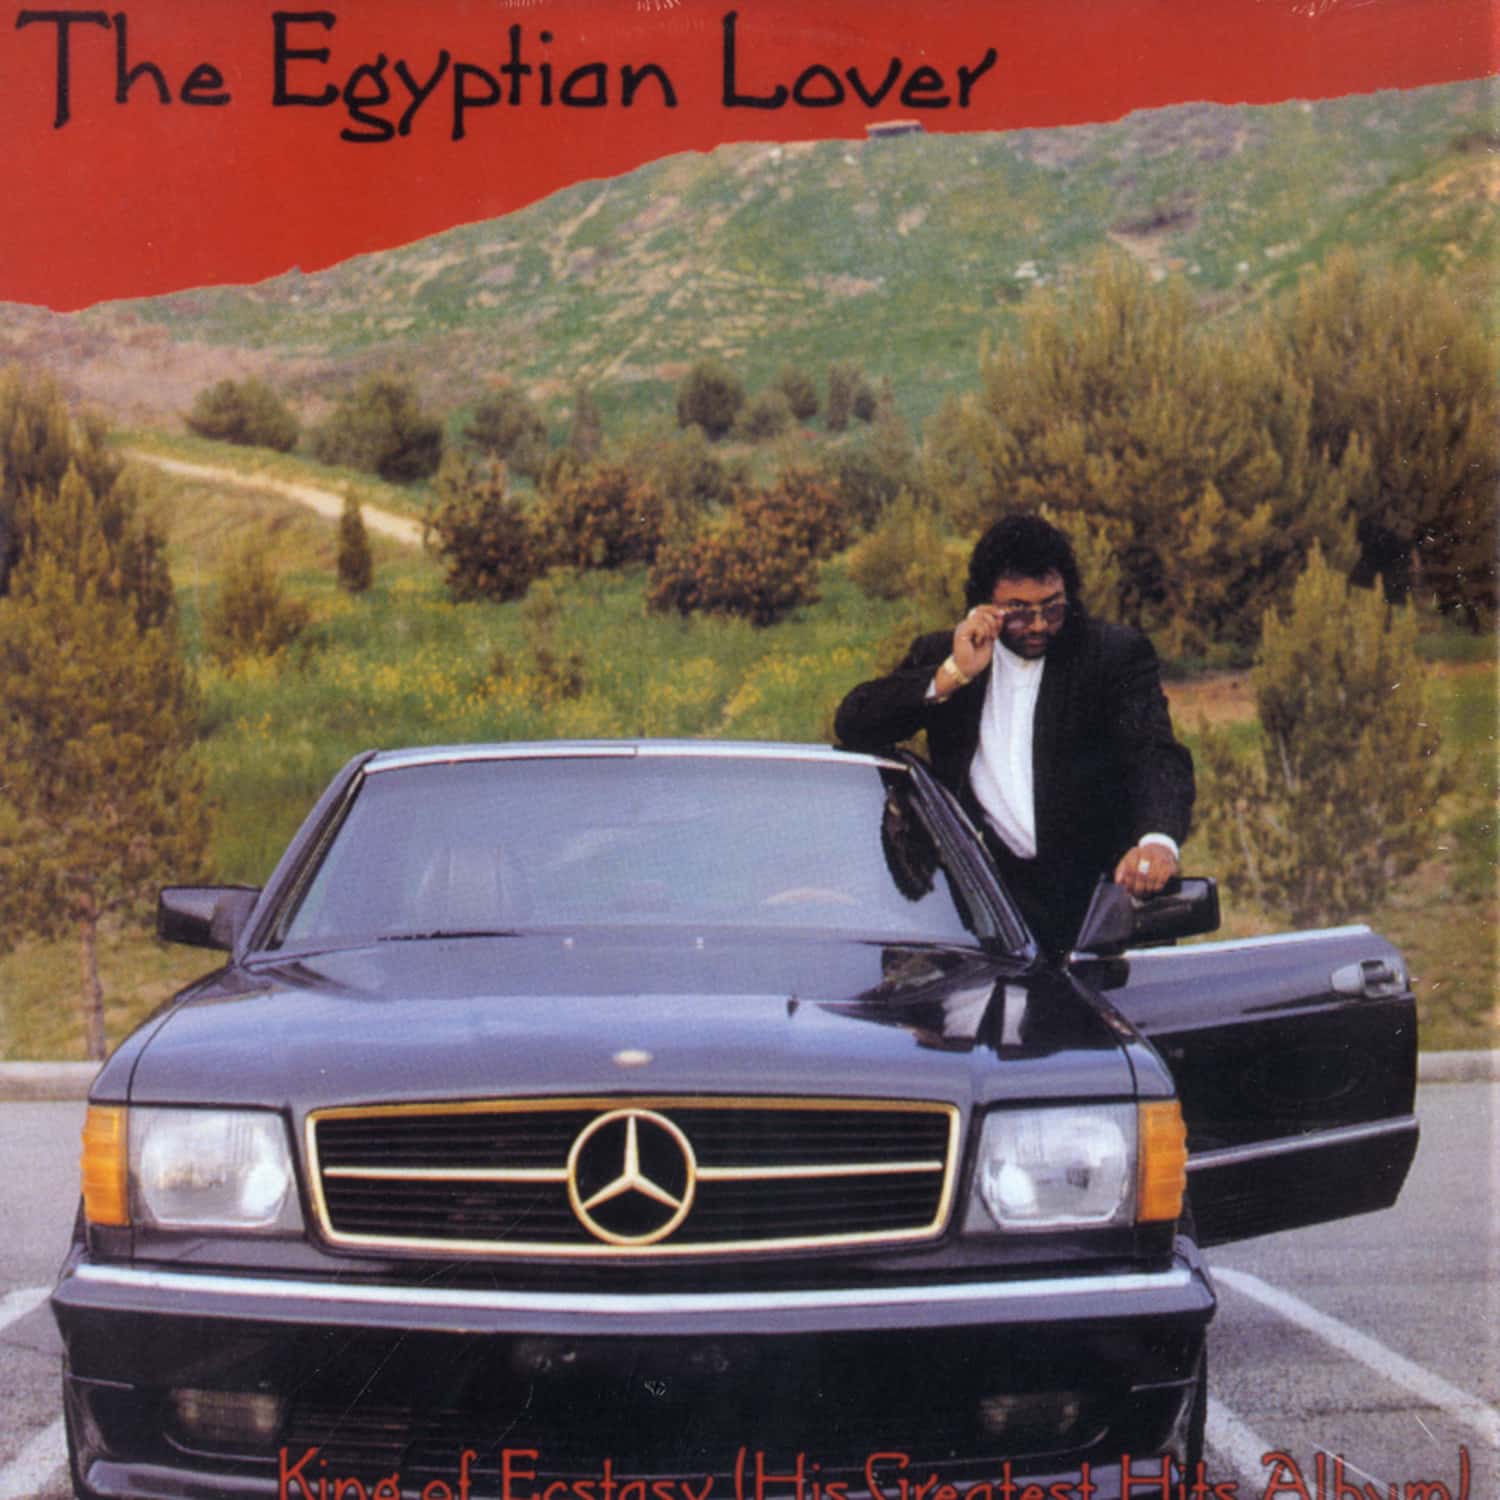 The Egyptian Lover - KING OF ECSTACY 